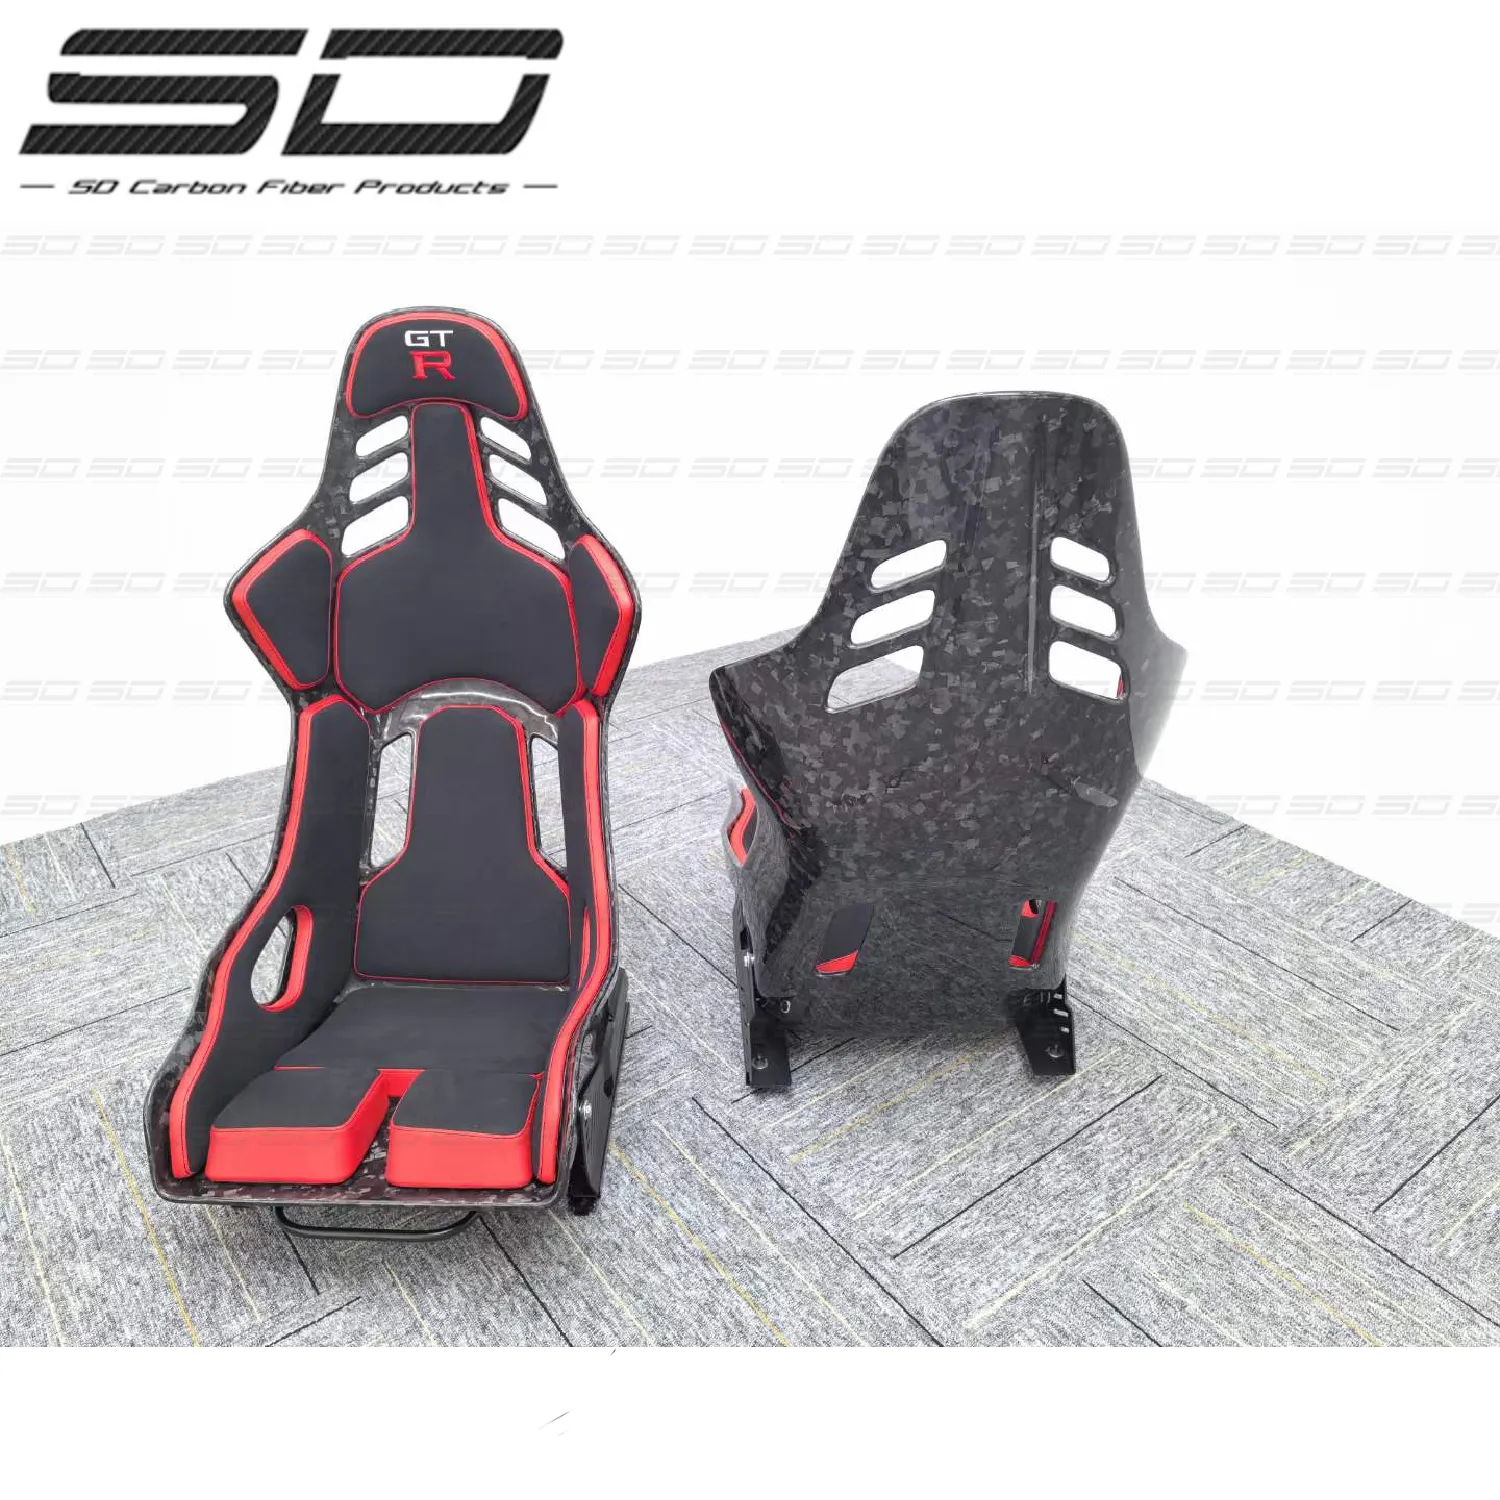 Upgrade Bucket R Style Forged Carbon Fiber Racing Seats for All Series Car Model